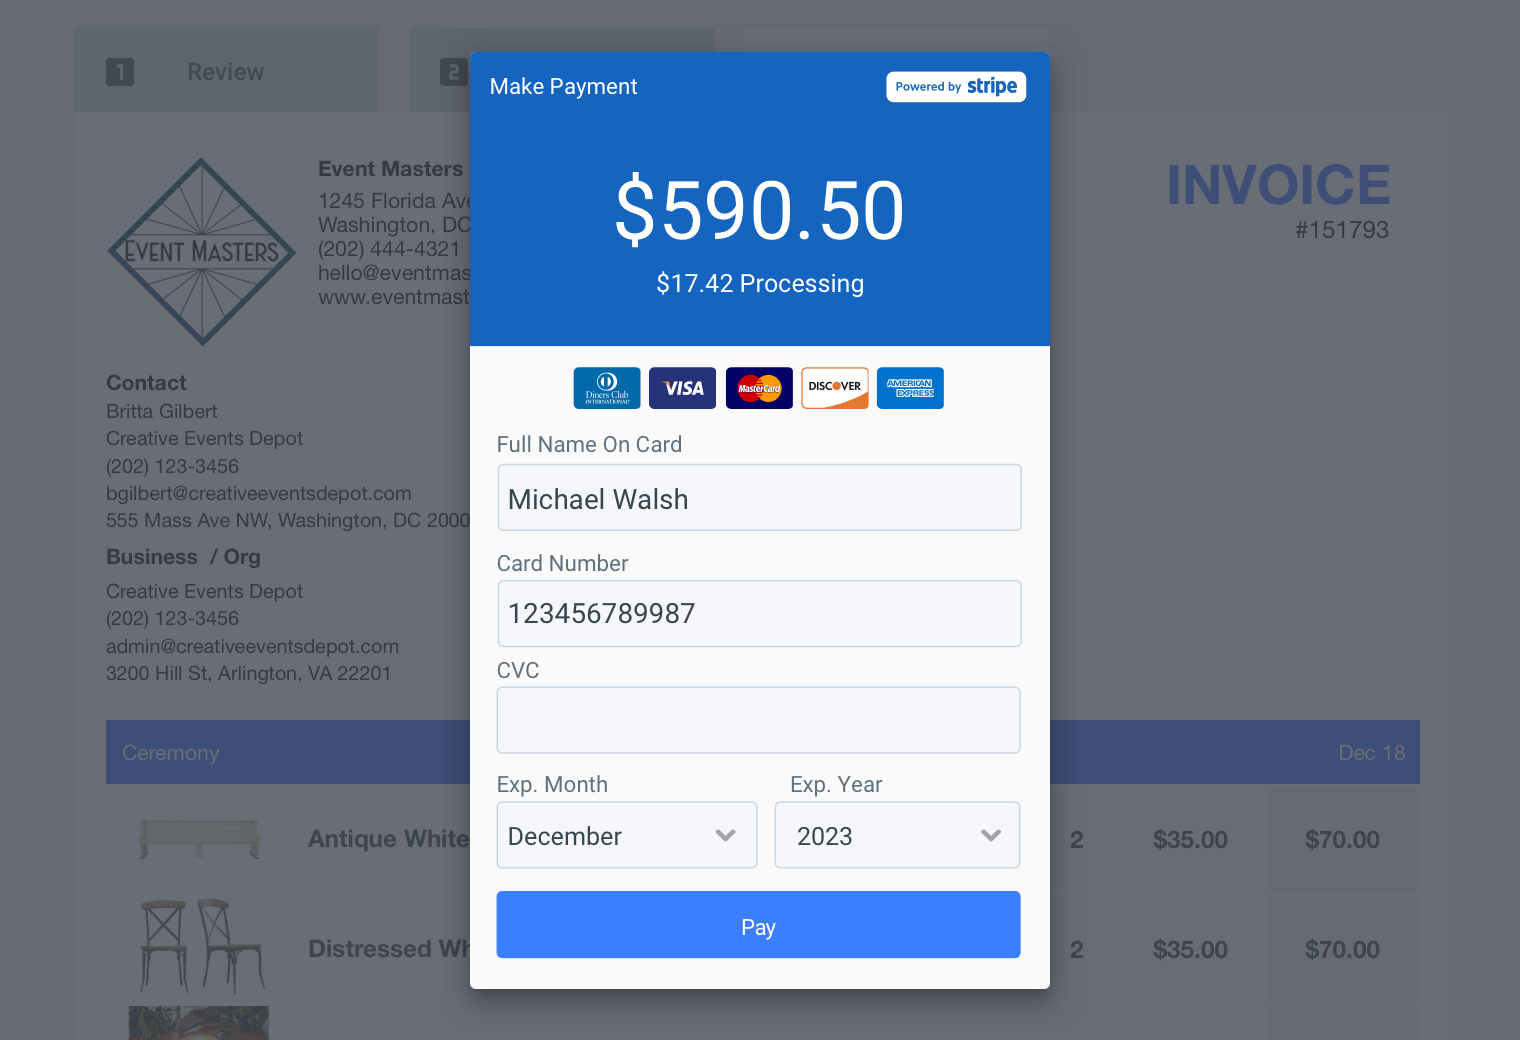 Goodshuffle Pro users get paid faster and provide their customers a seamless payment experience through Stripe's payment processor.